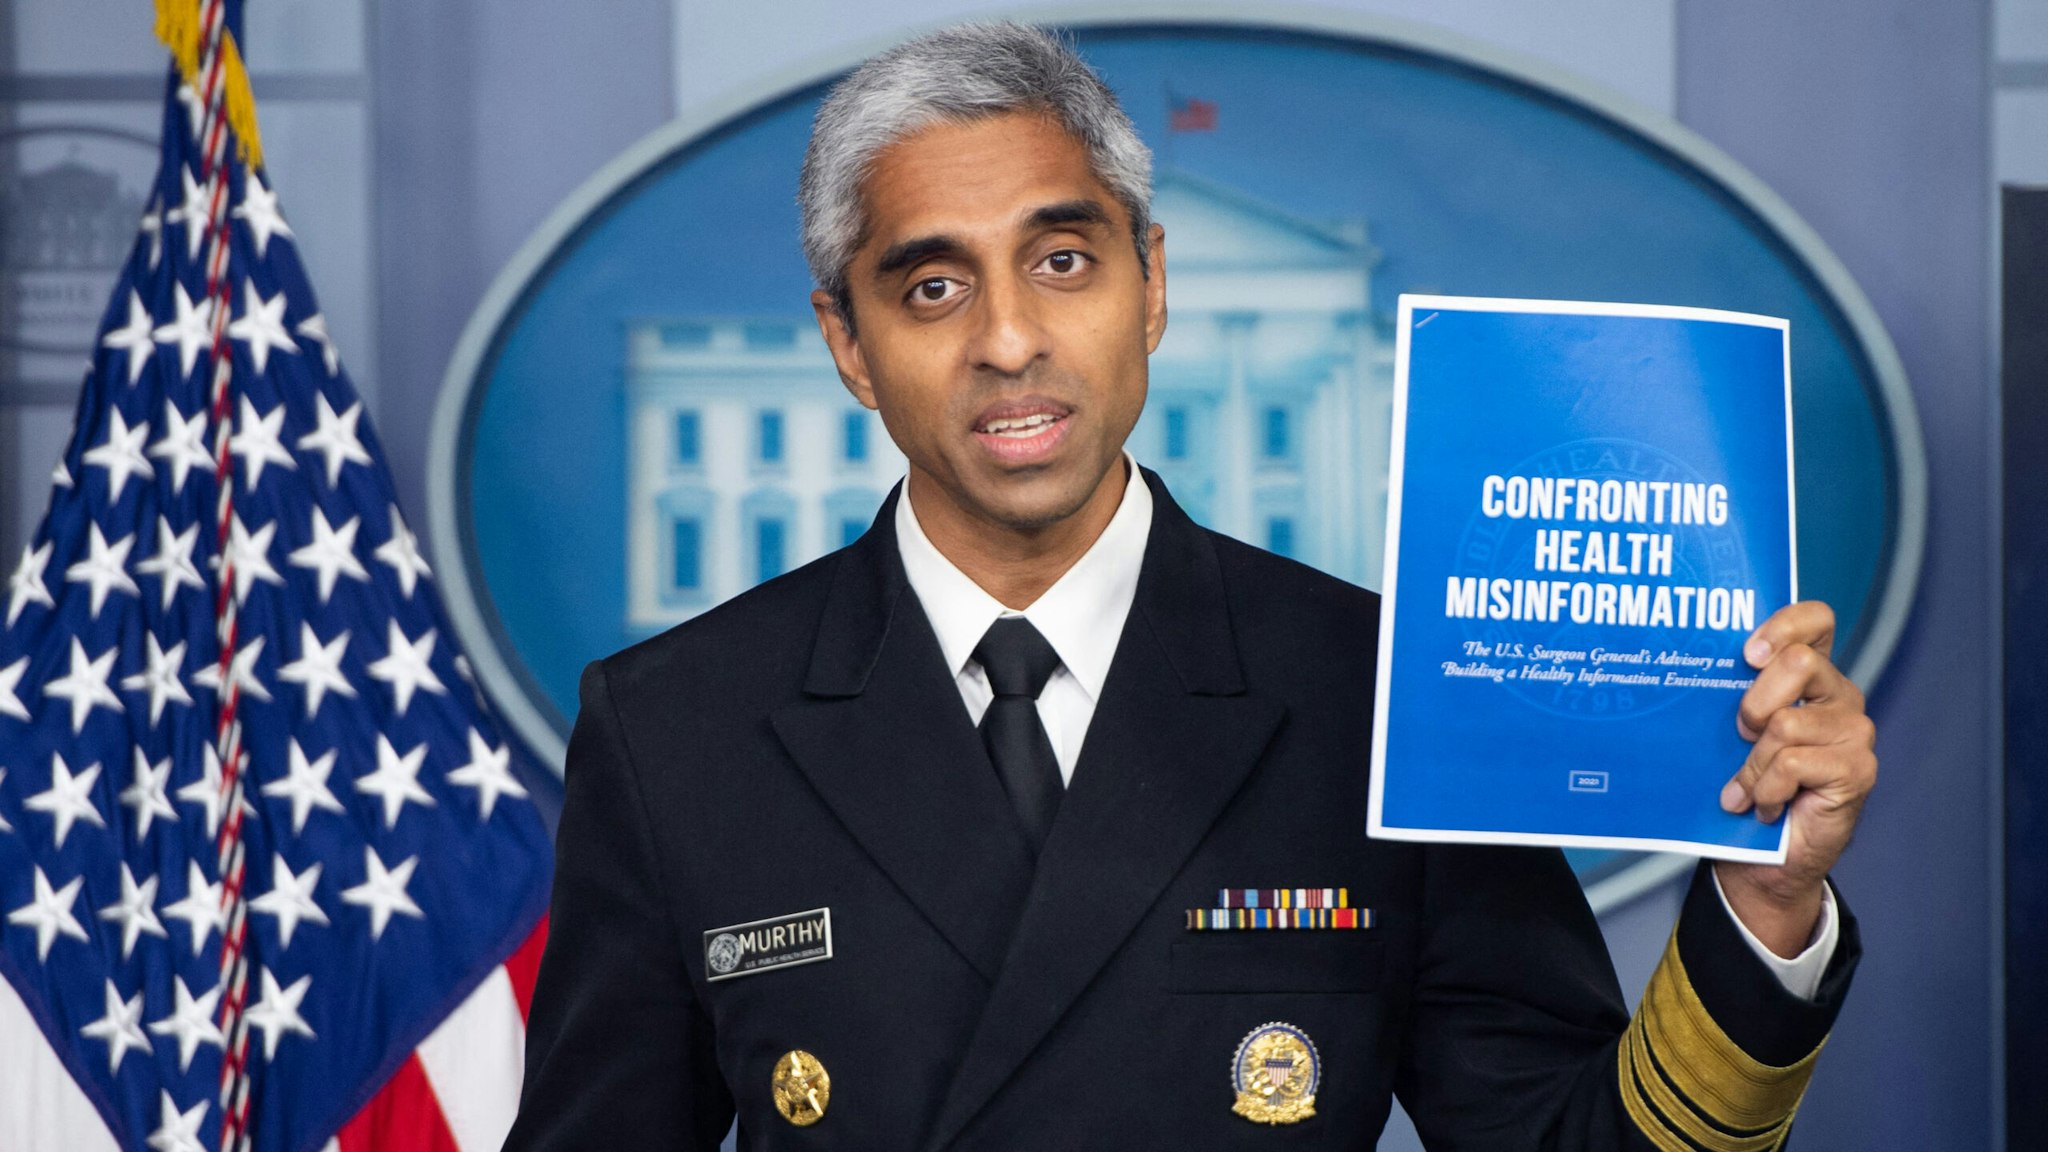 US Surgeon General Dr. Vivek H. Murthy speaks during a press briefing in the Brady Briefing Room of the White House in Washington, DC on July 15, 2021.